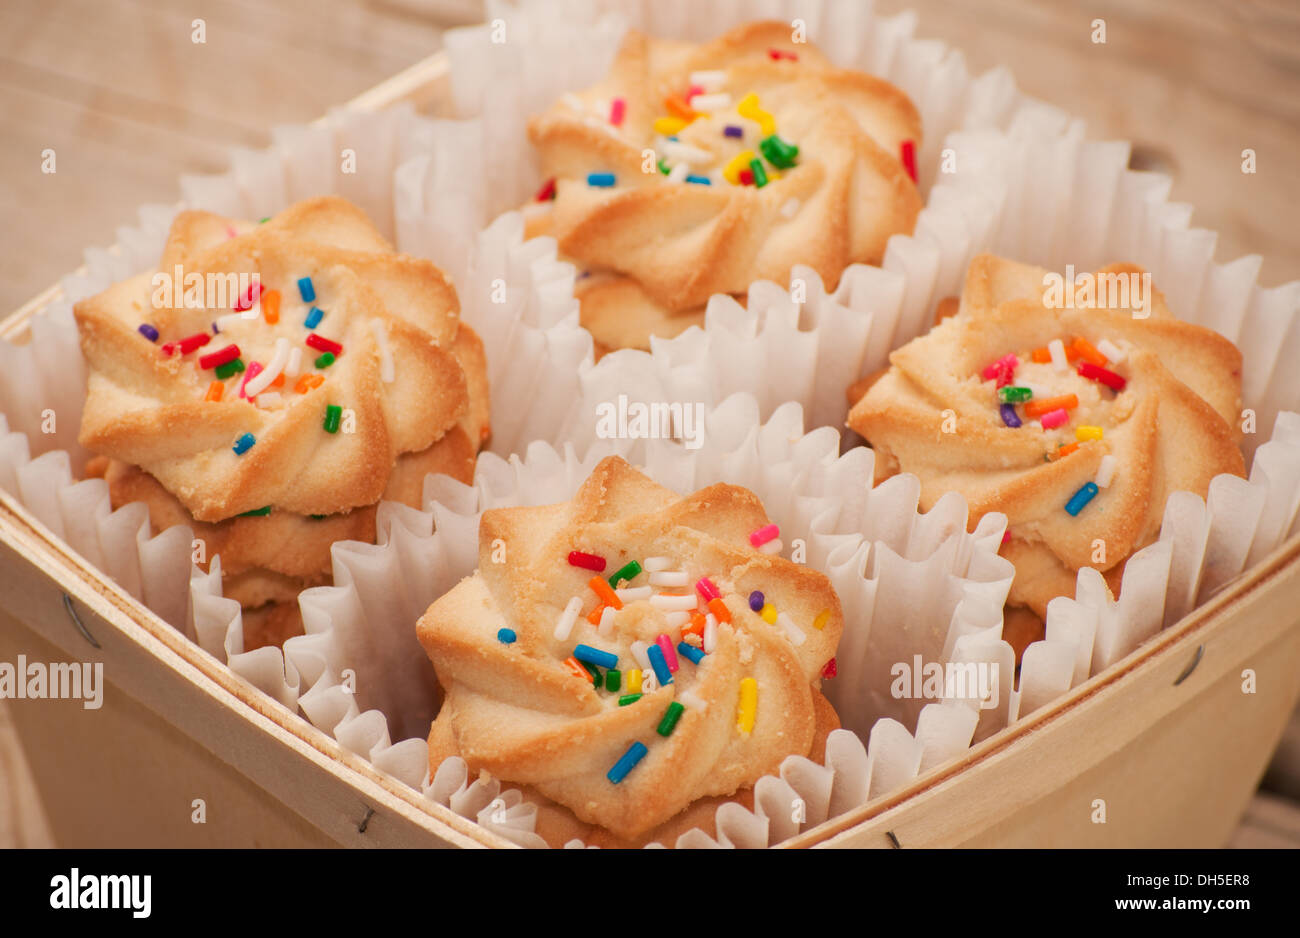 Closeup of shortbread cookies with colorful nonpareil sprinkles on top, in a wooden basket Stock Photo